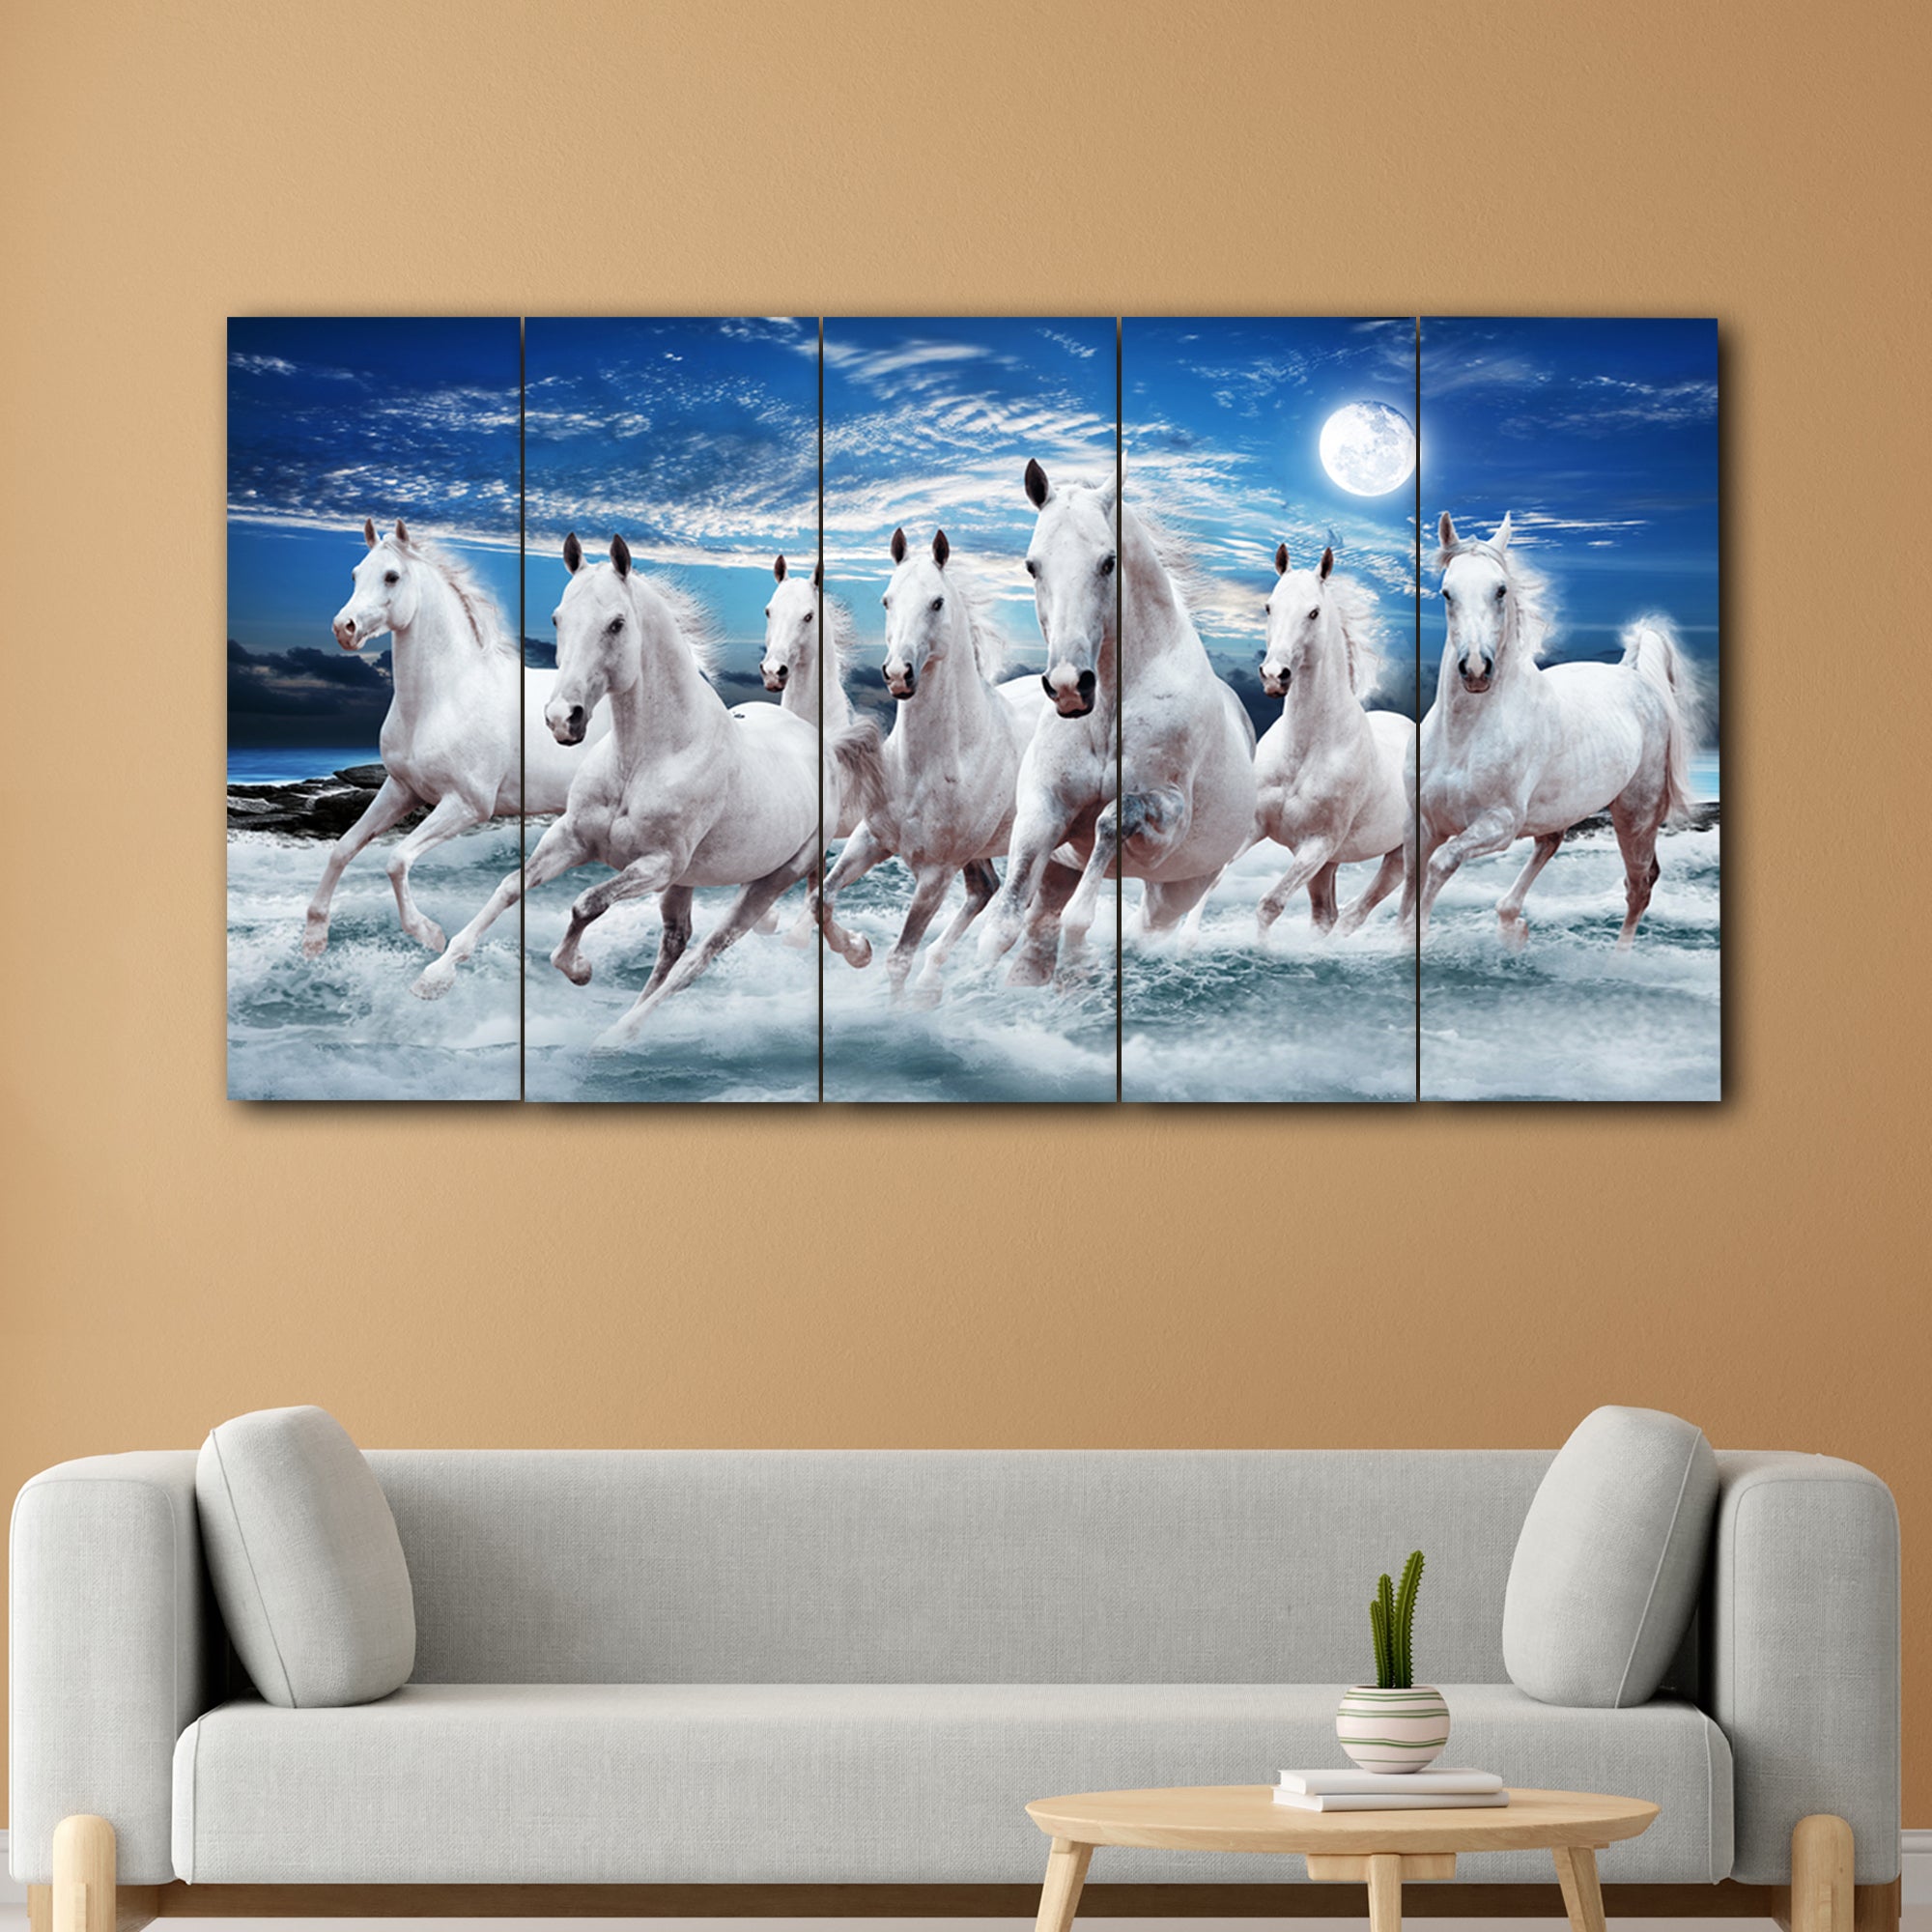 White Seven Horses In 5 Panel Painting